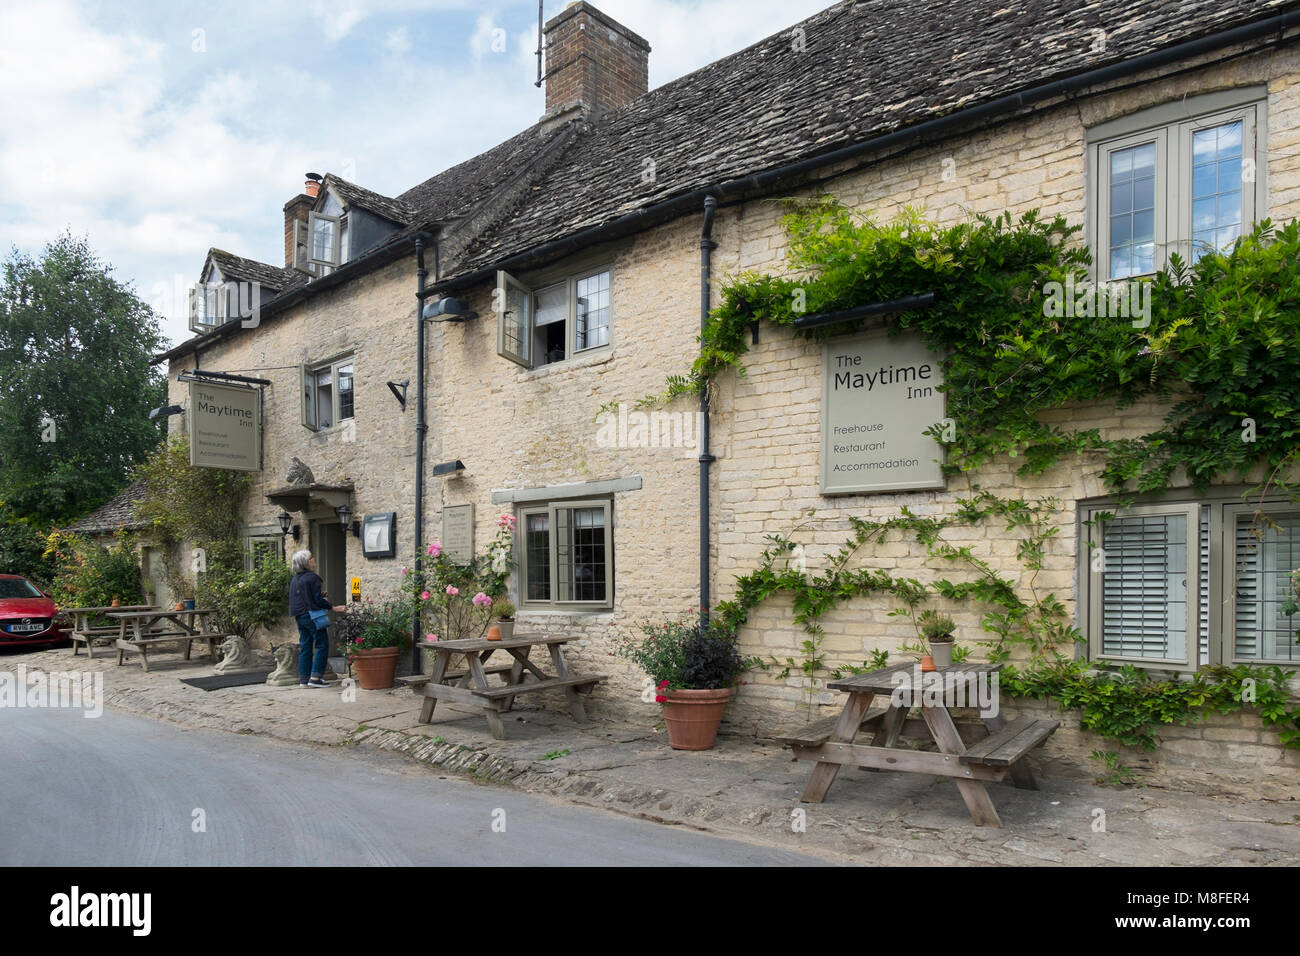 The Maytime Inn in Asthall, Oxfordshire, UK Stock Photo